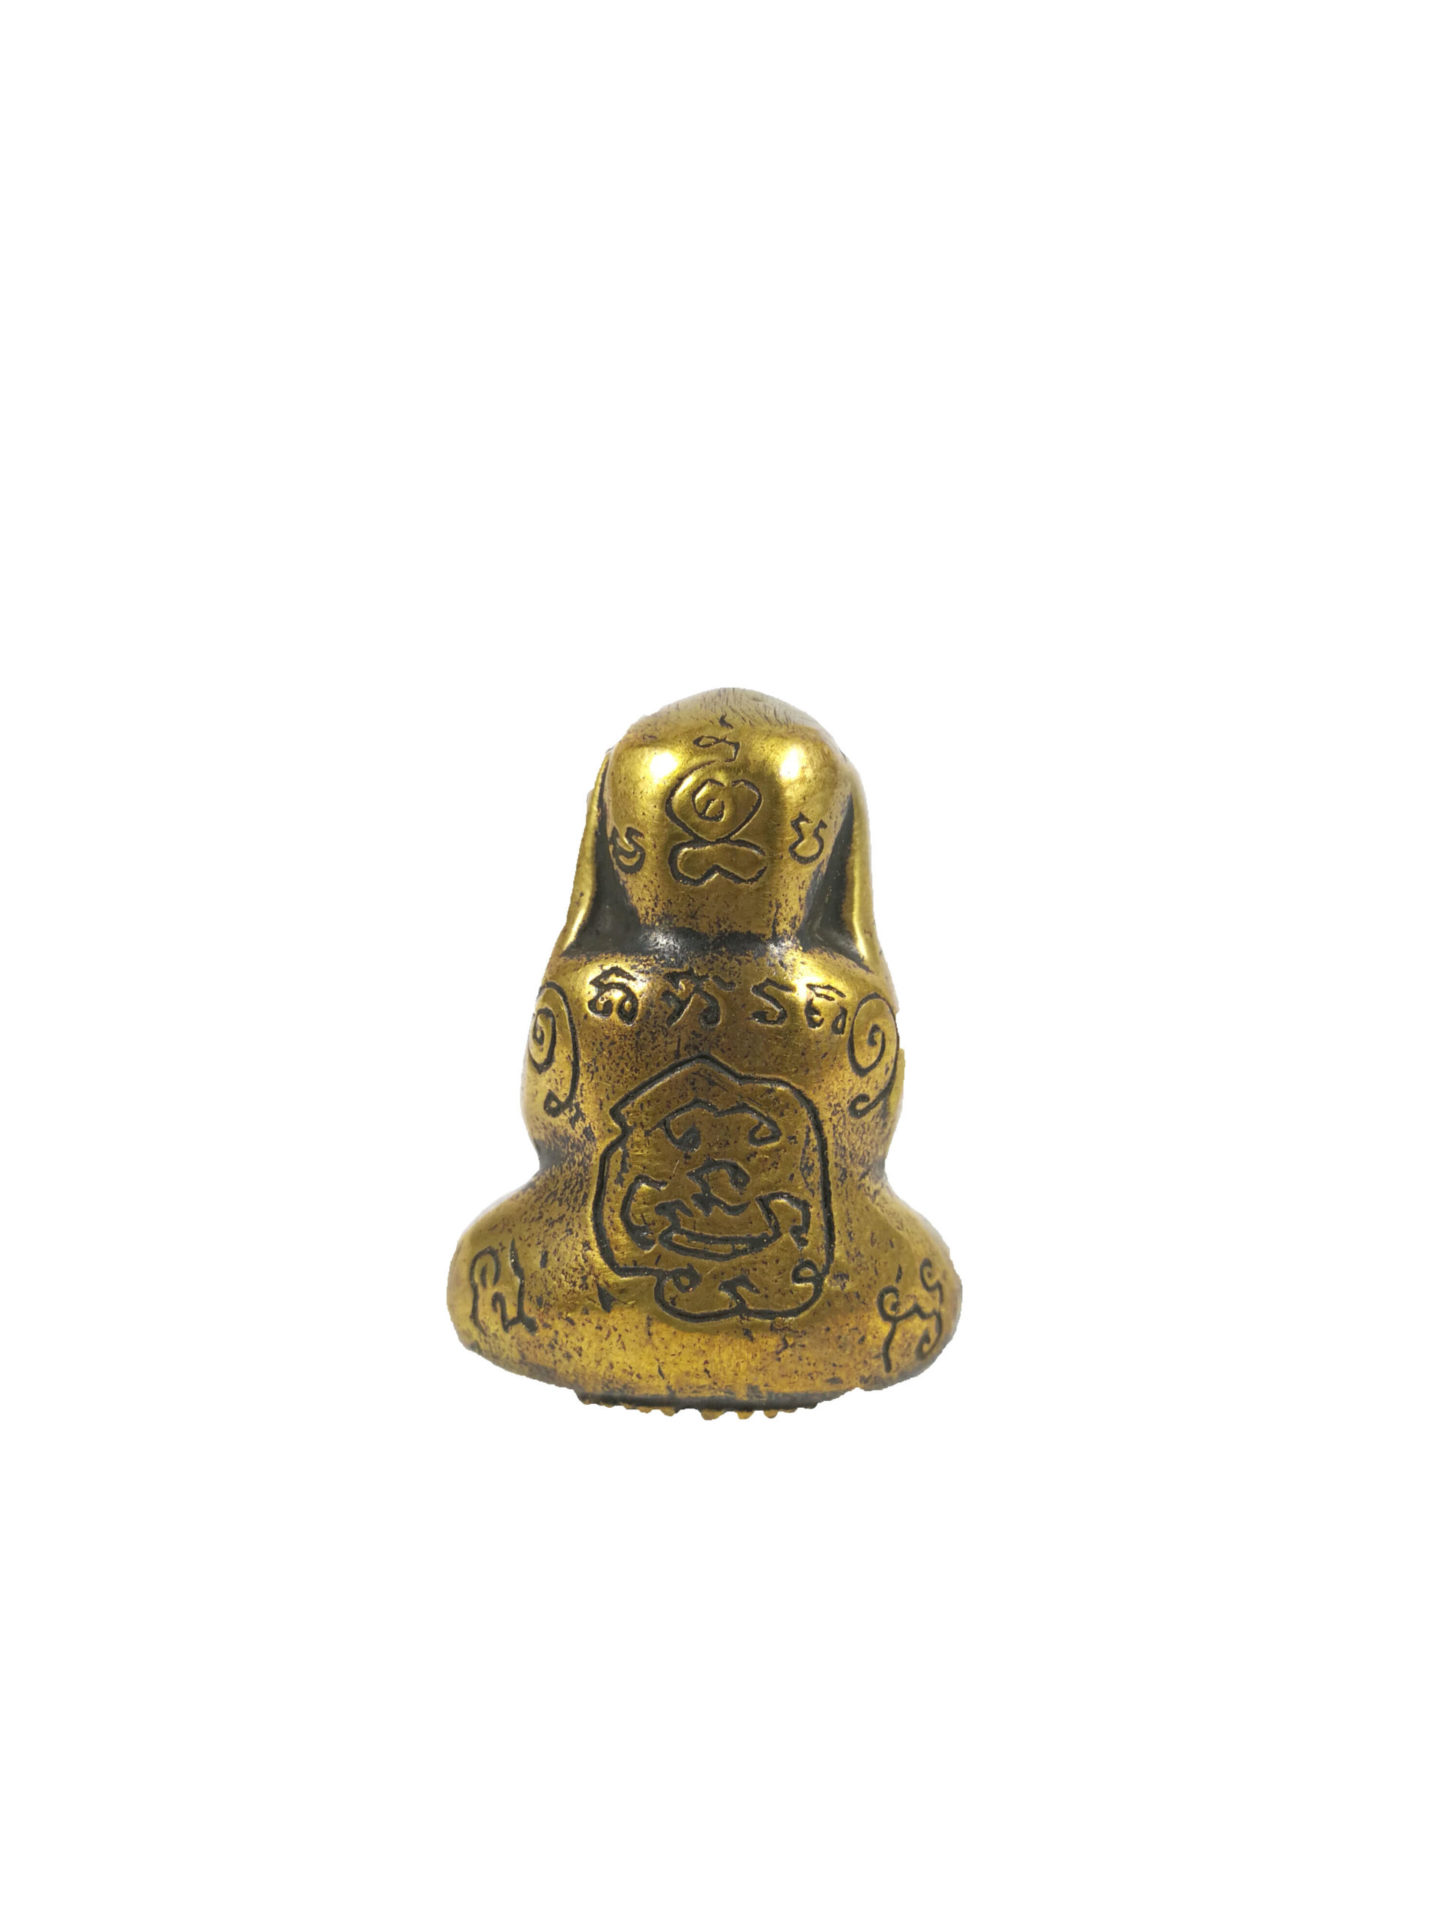 Phra Pidta 必达佛 refers to the closed-eye Buddha.